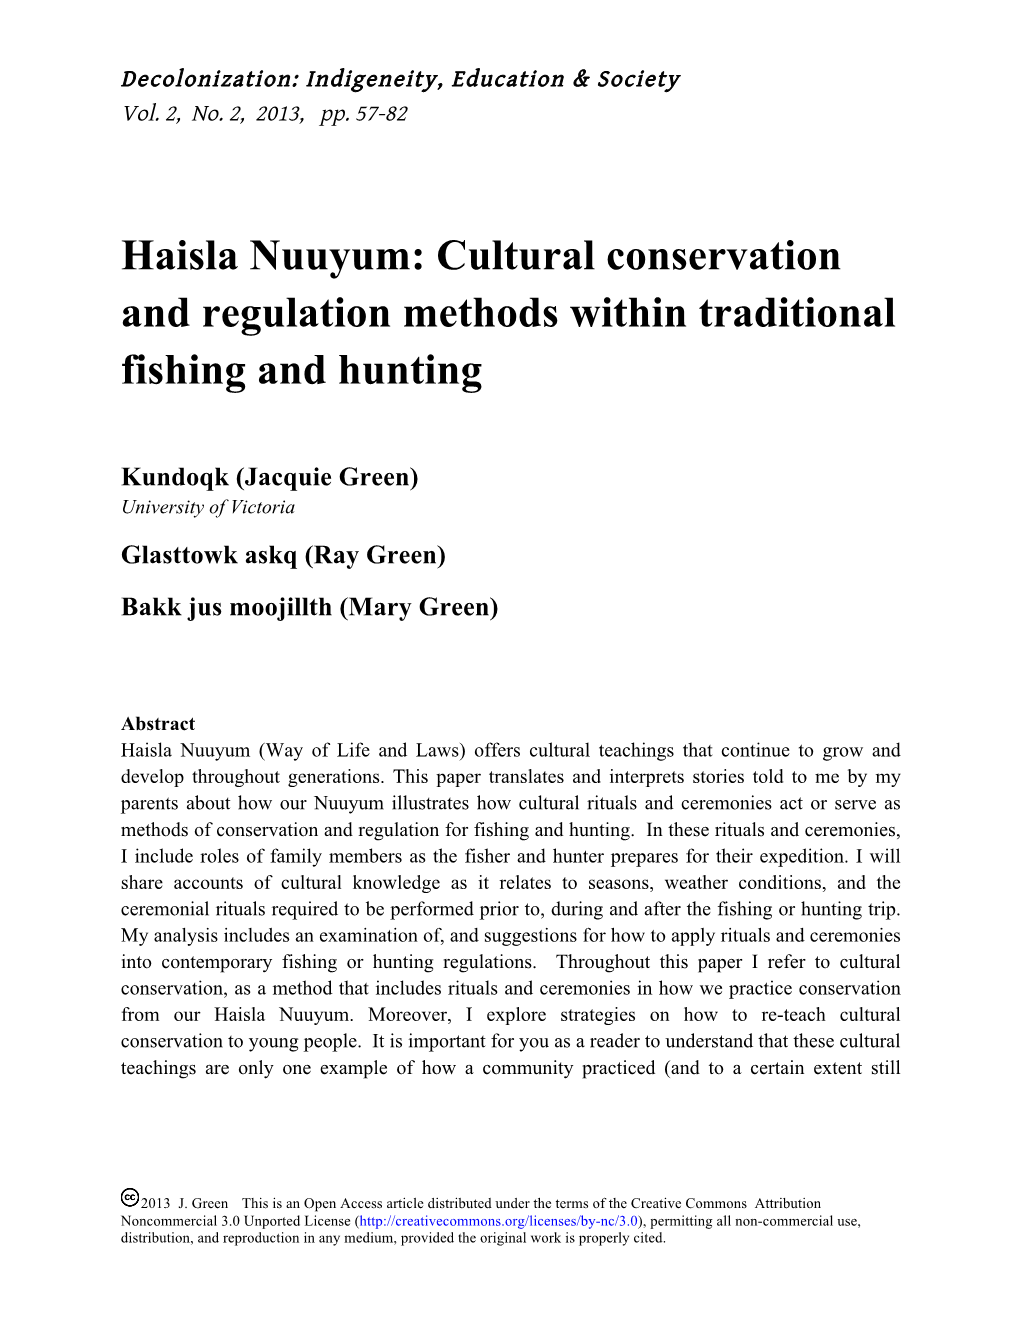 Haisla Nuuyum: Cultural Conservation and Regulation Methods Within Traditional Fishing and Hunting